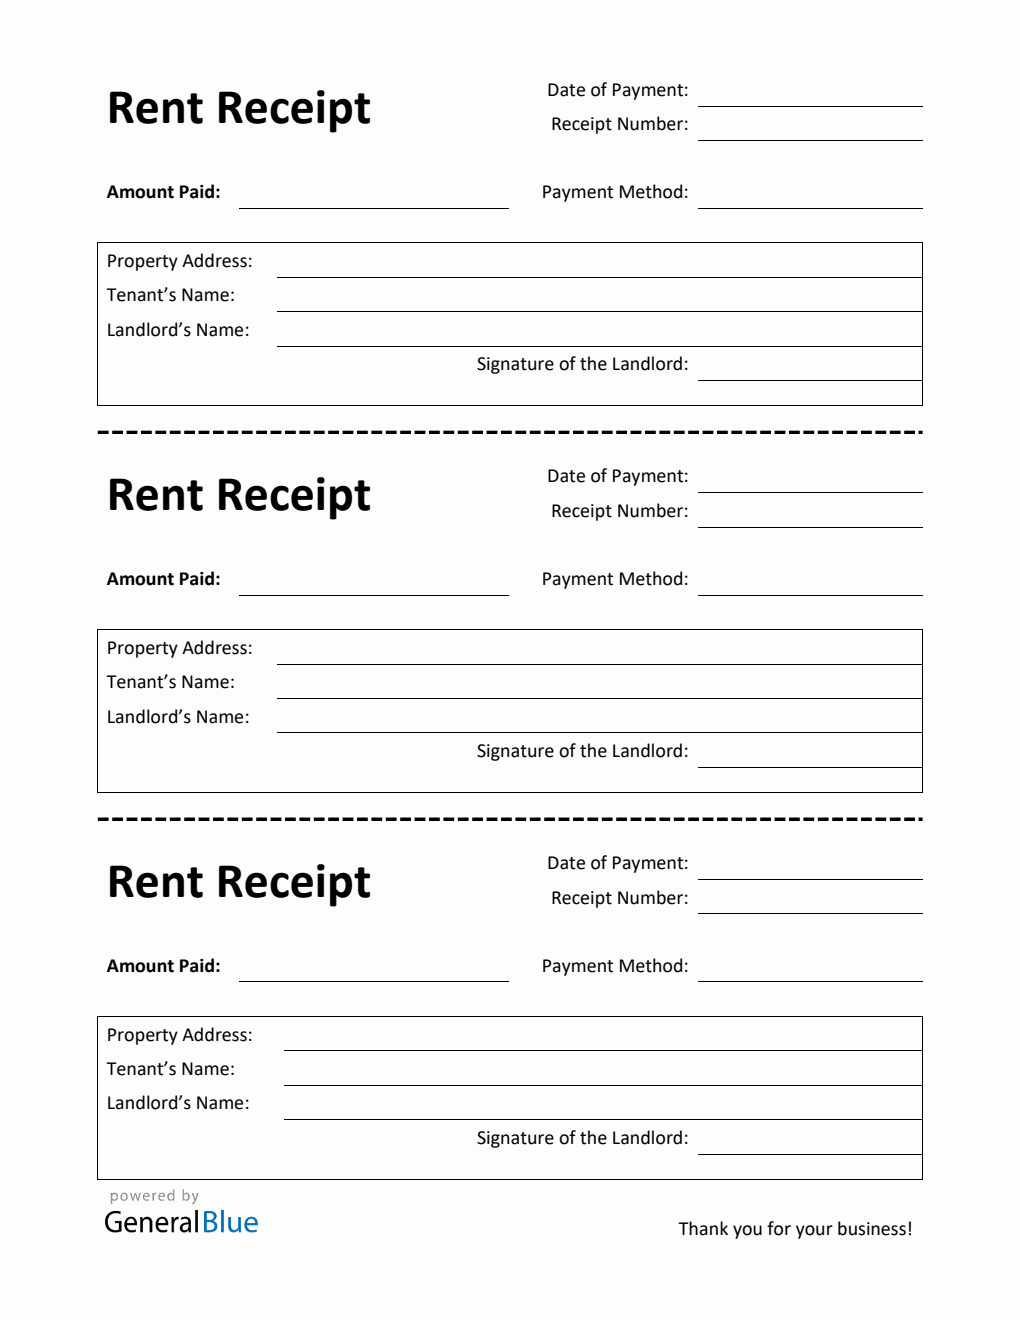 Printable Rent Receipt Template in Word